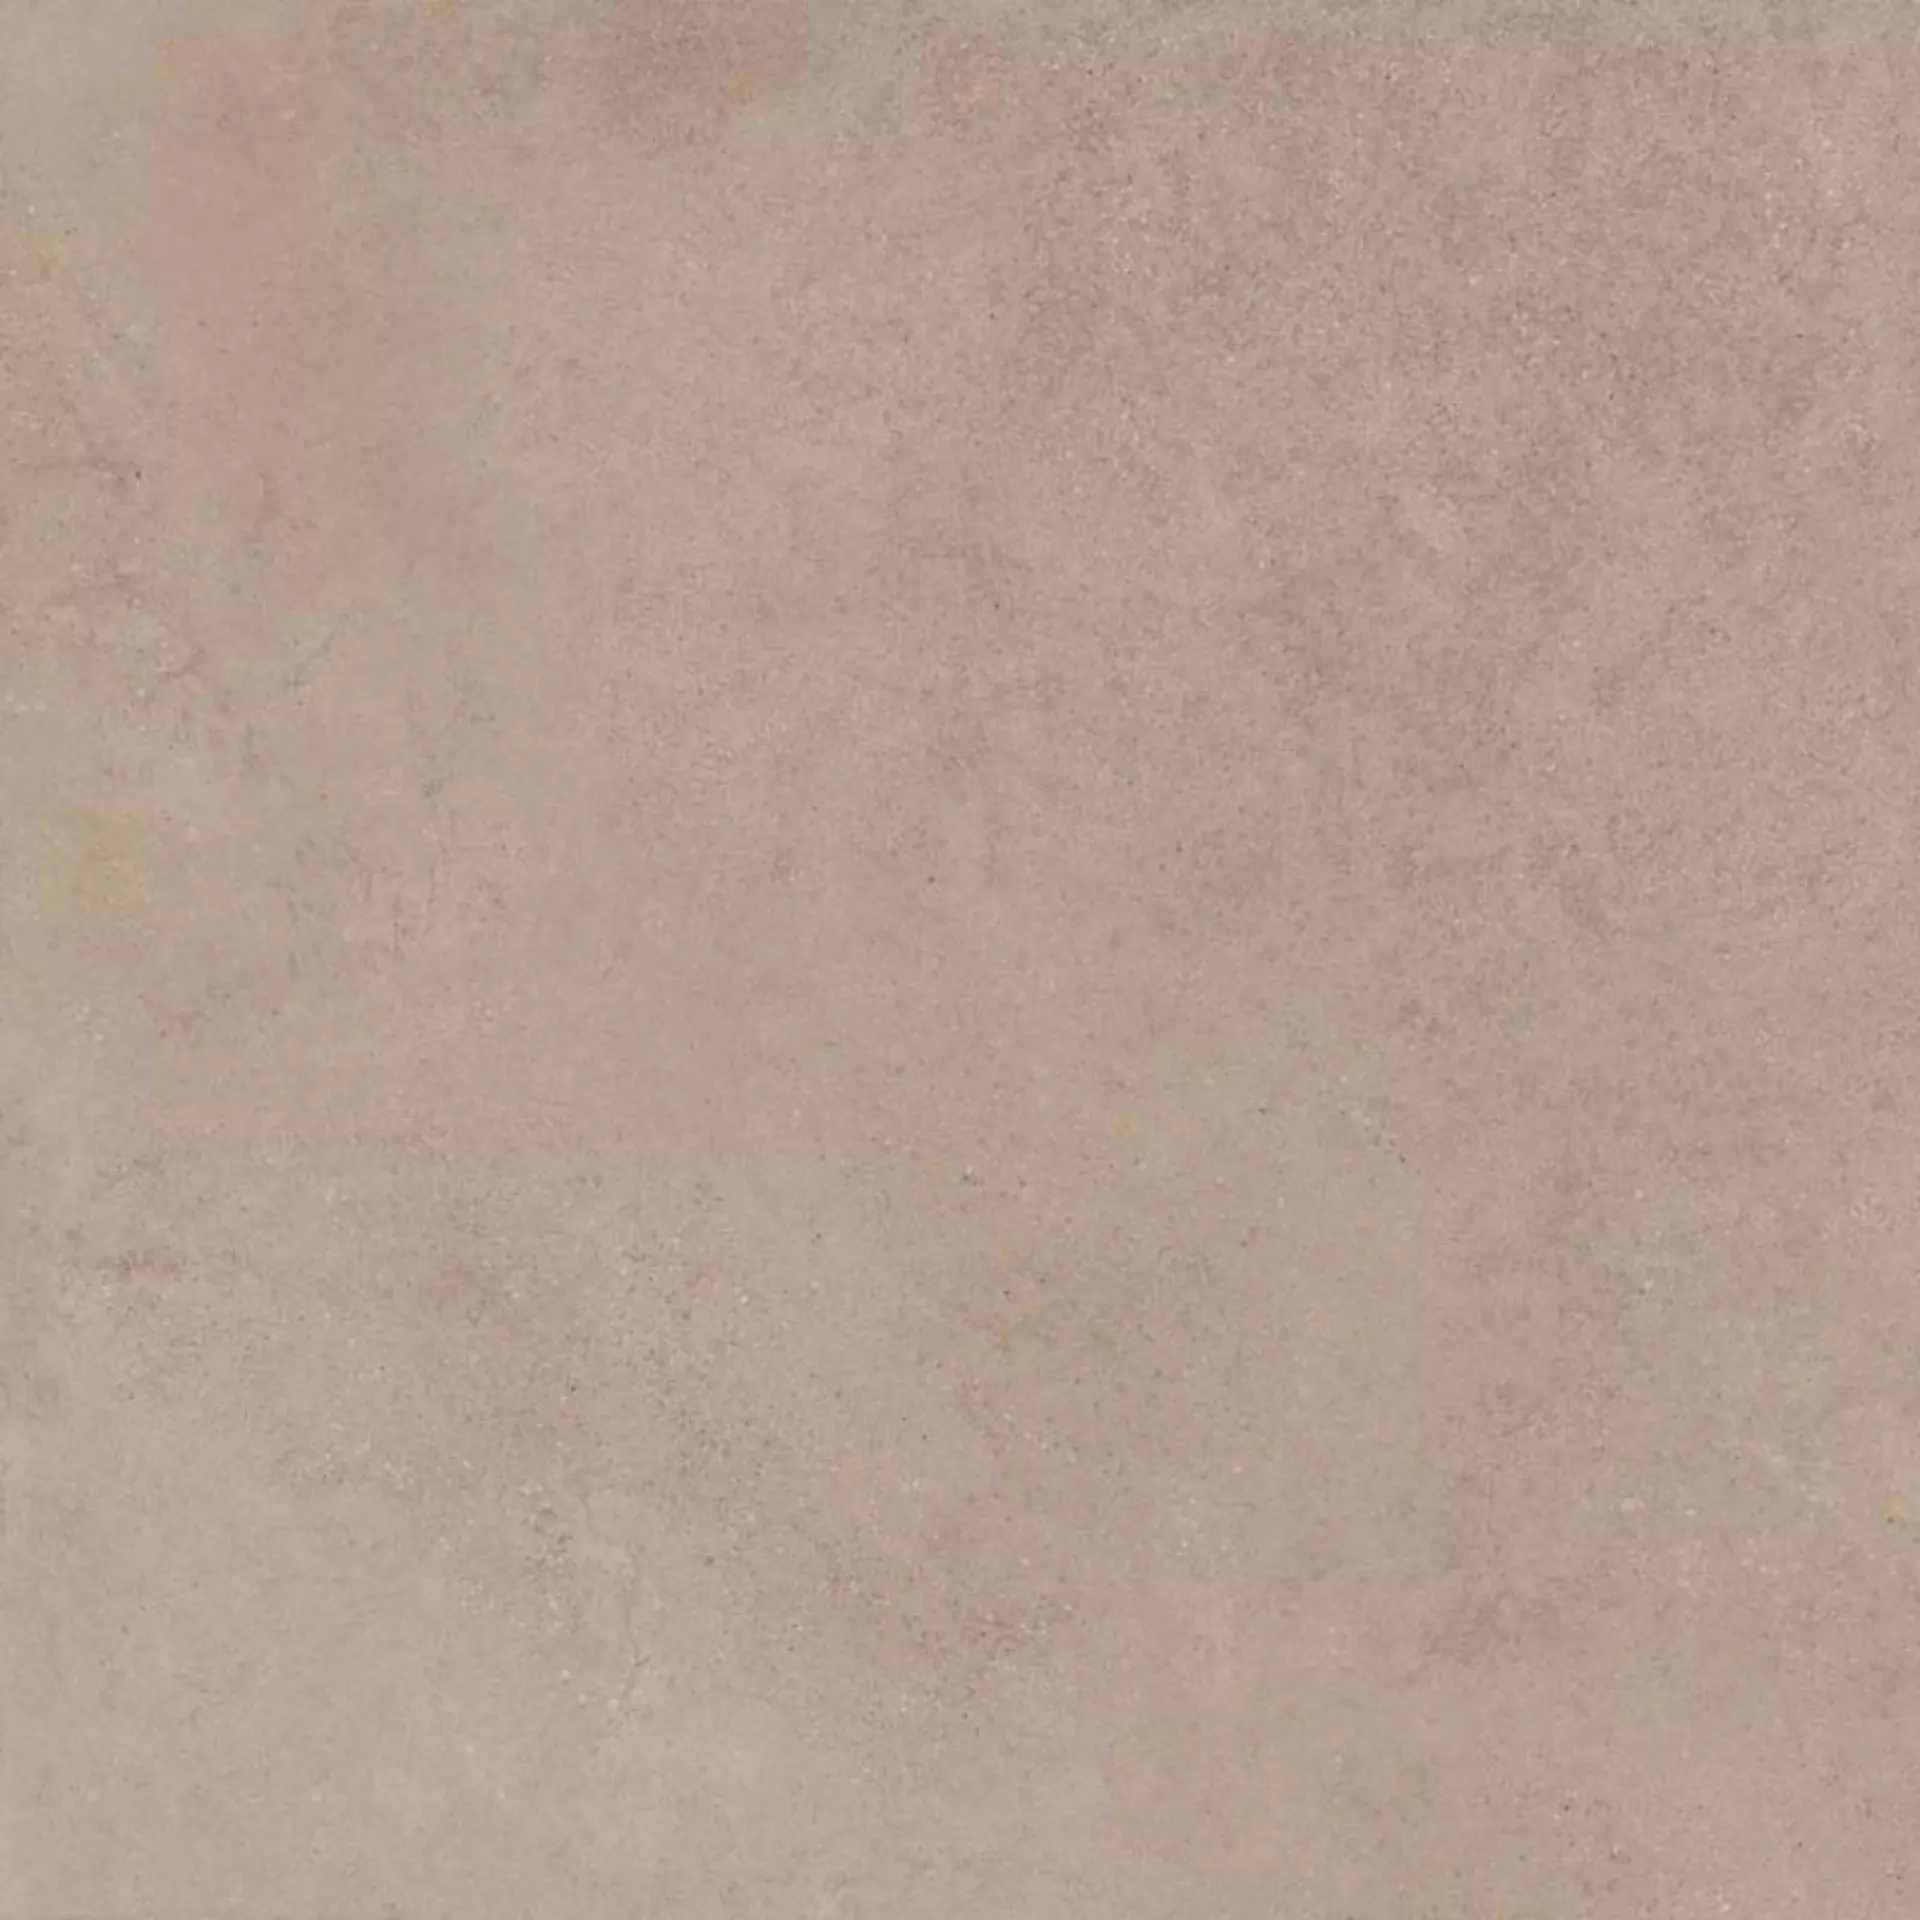 Sant Agostino Silkystone Taupe Natural CSASKSTA12 120x120cm rectified 10mm